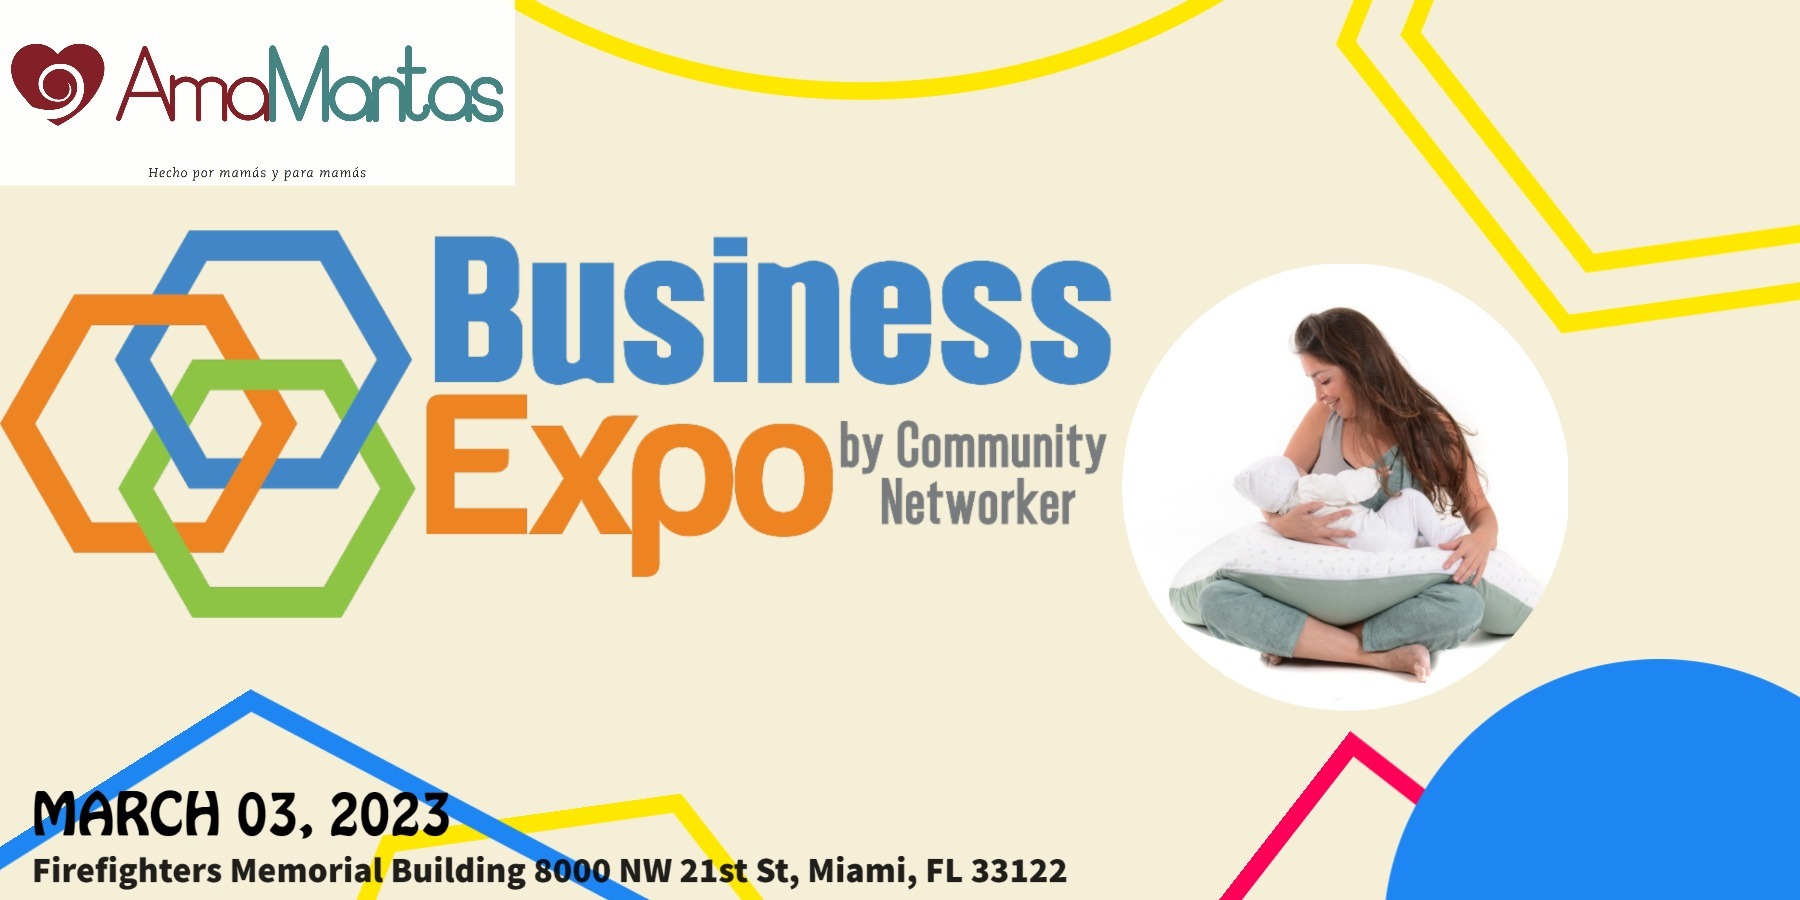 Business Expo by Community Networker 2023